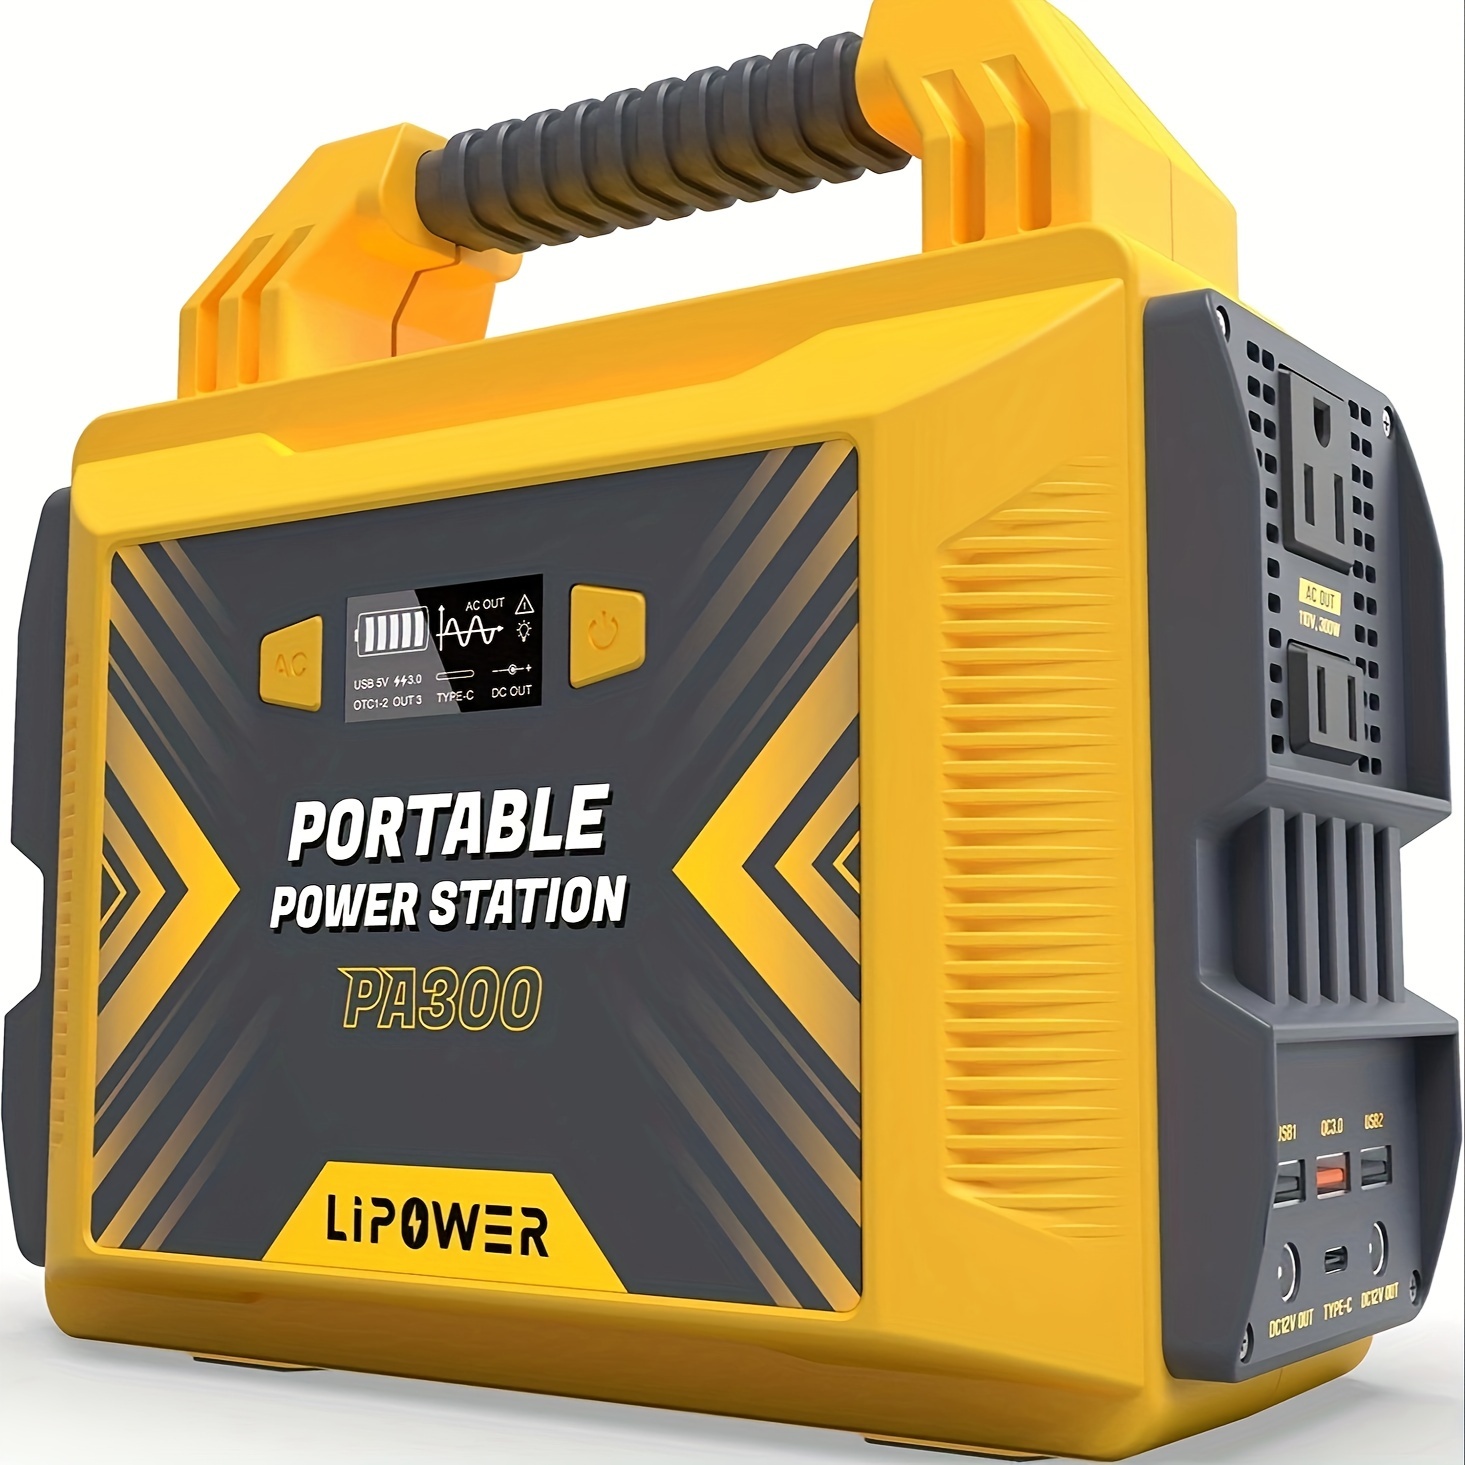 

300w Portable Power Station, 296wh Solar Generator Backup Battery With Led Light For Camping Travel Emergency